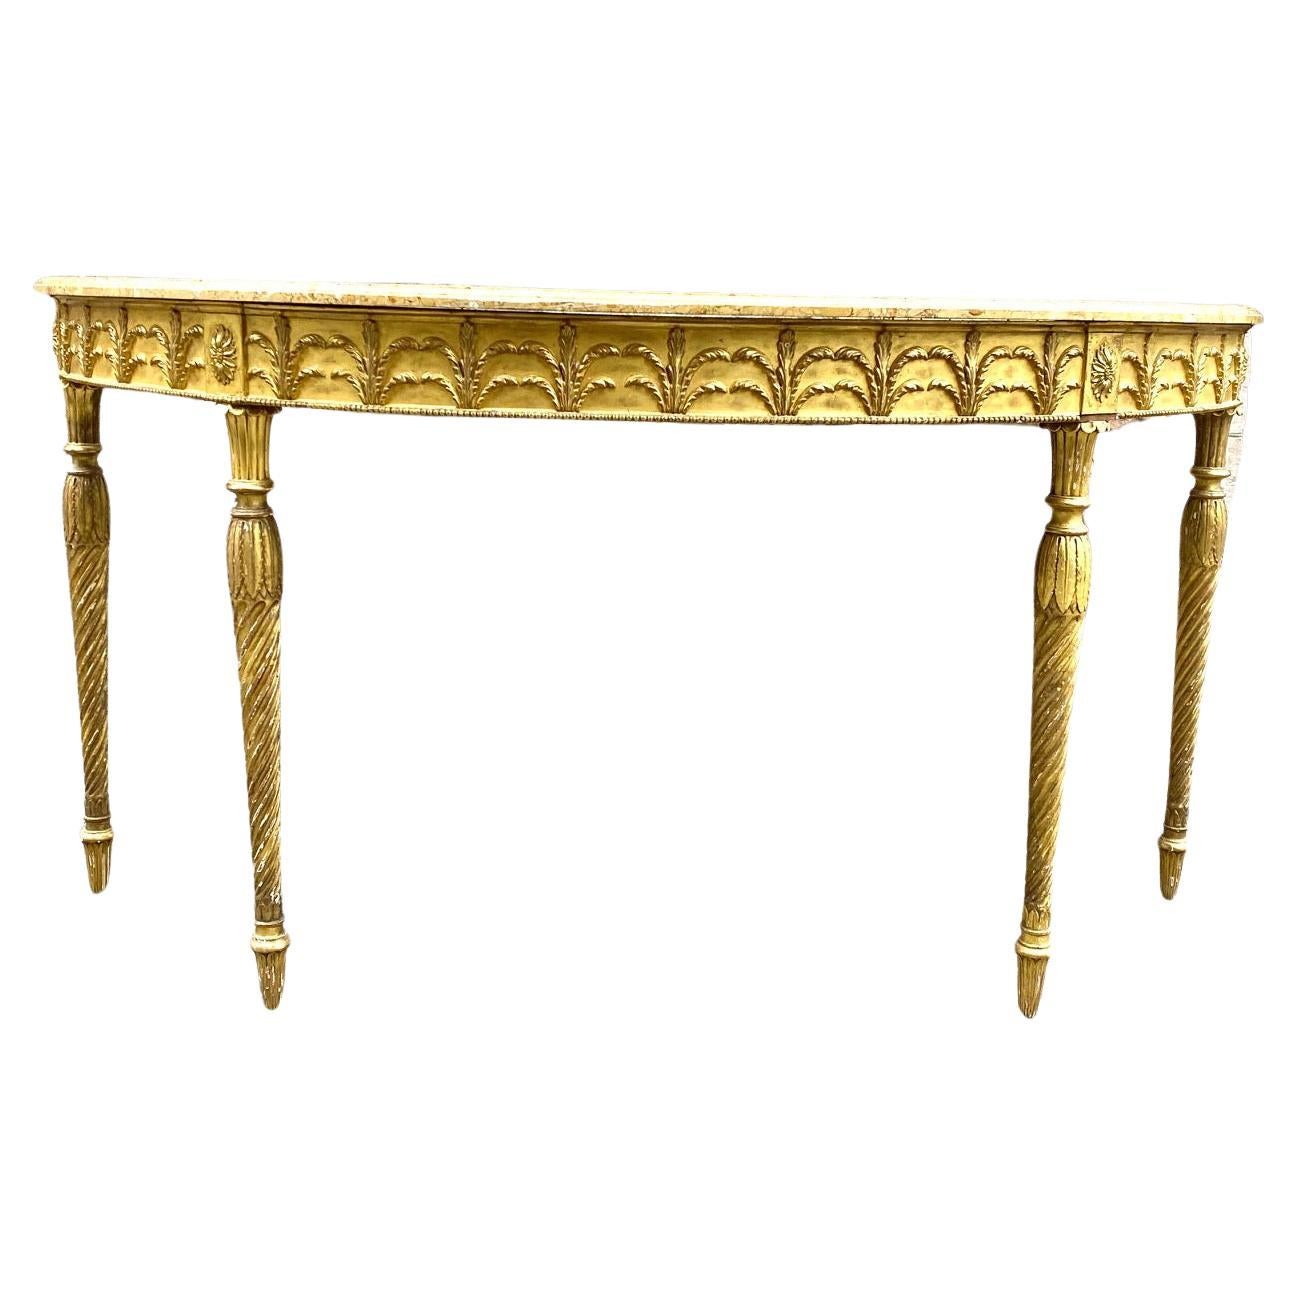 Rare Giltwood Adam Period Demi Lune Console Table with Sienna Marble Top For Sale